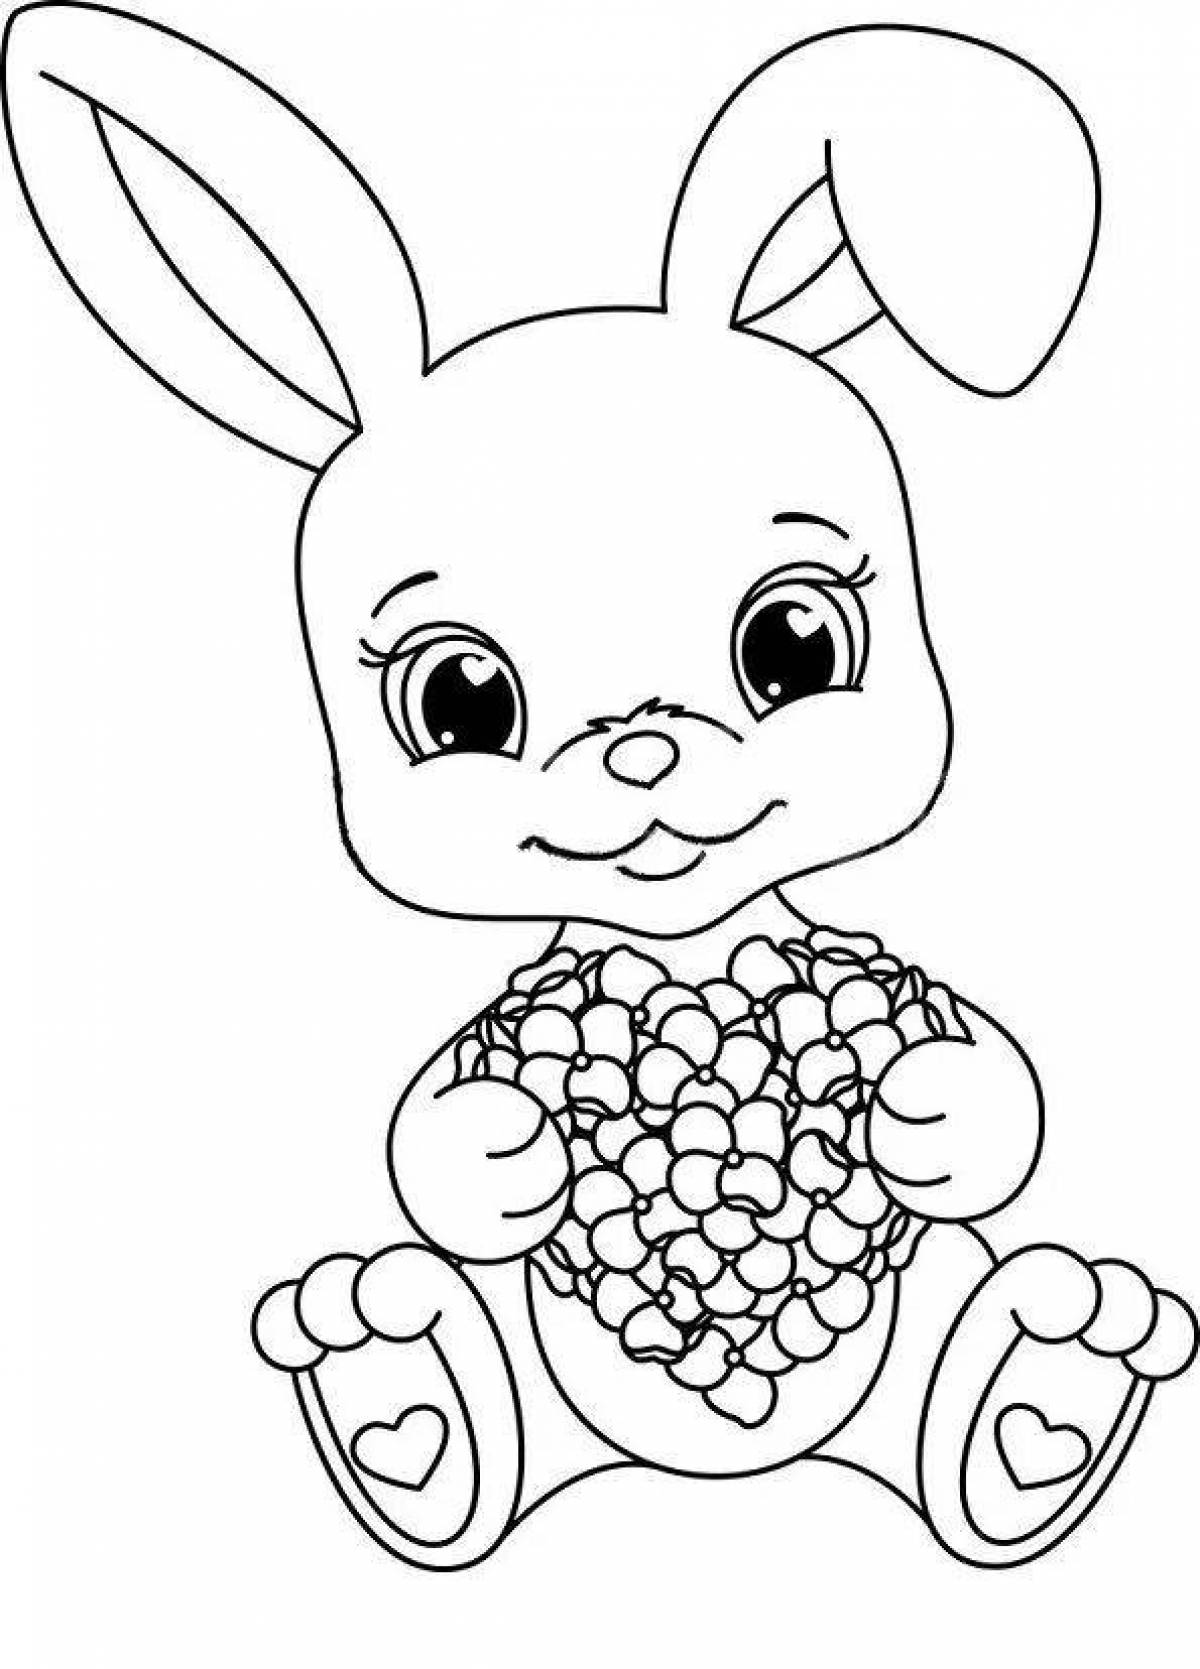 Fluffy bunny coloring book with a heart